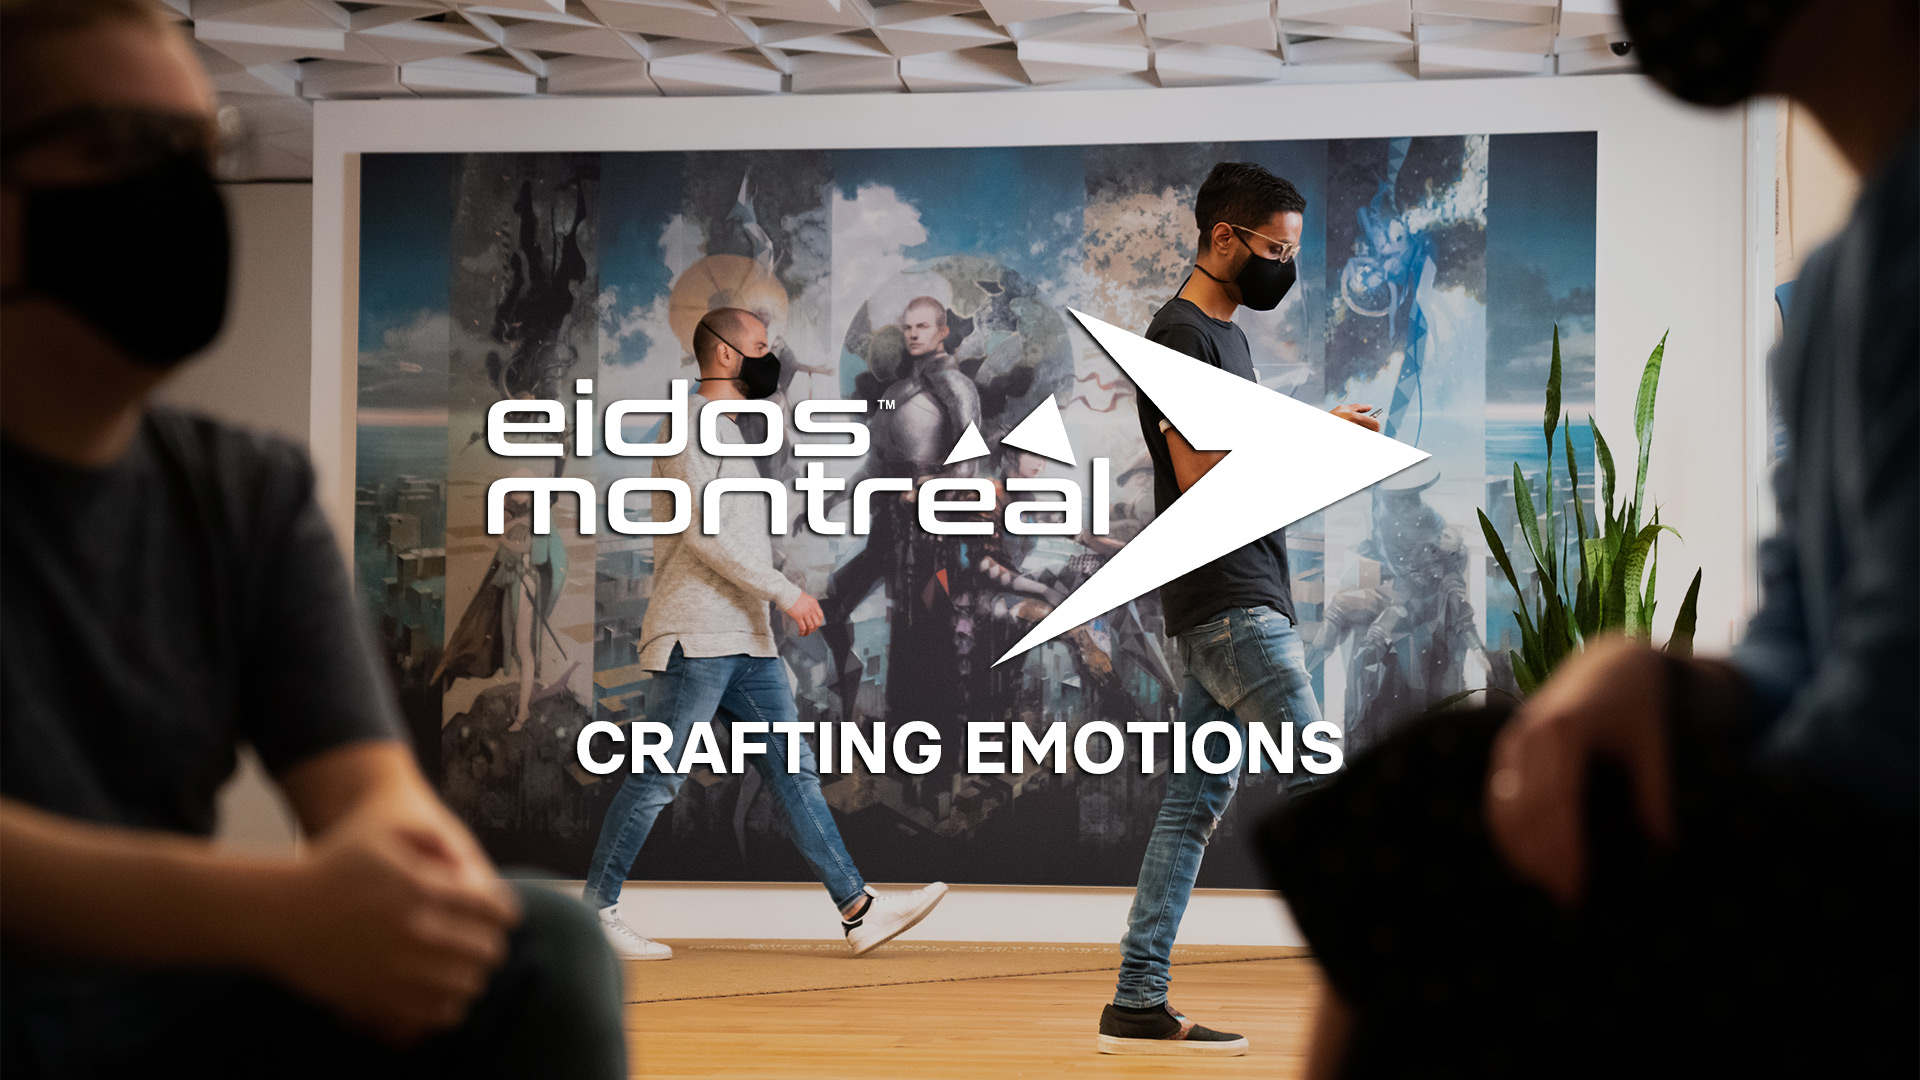 Eidos Montreal has multiple games in development using Unreal Engine 5